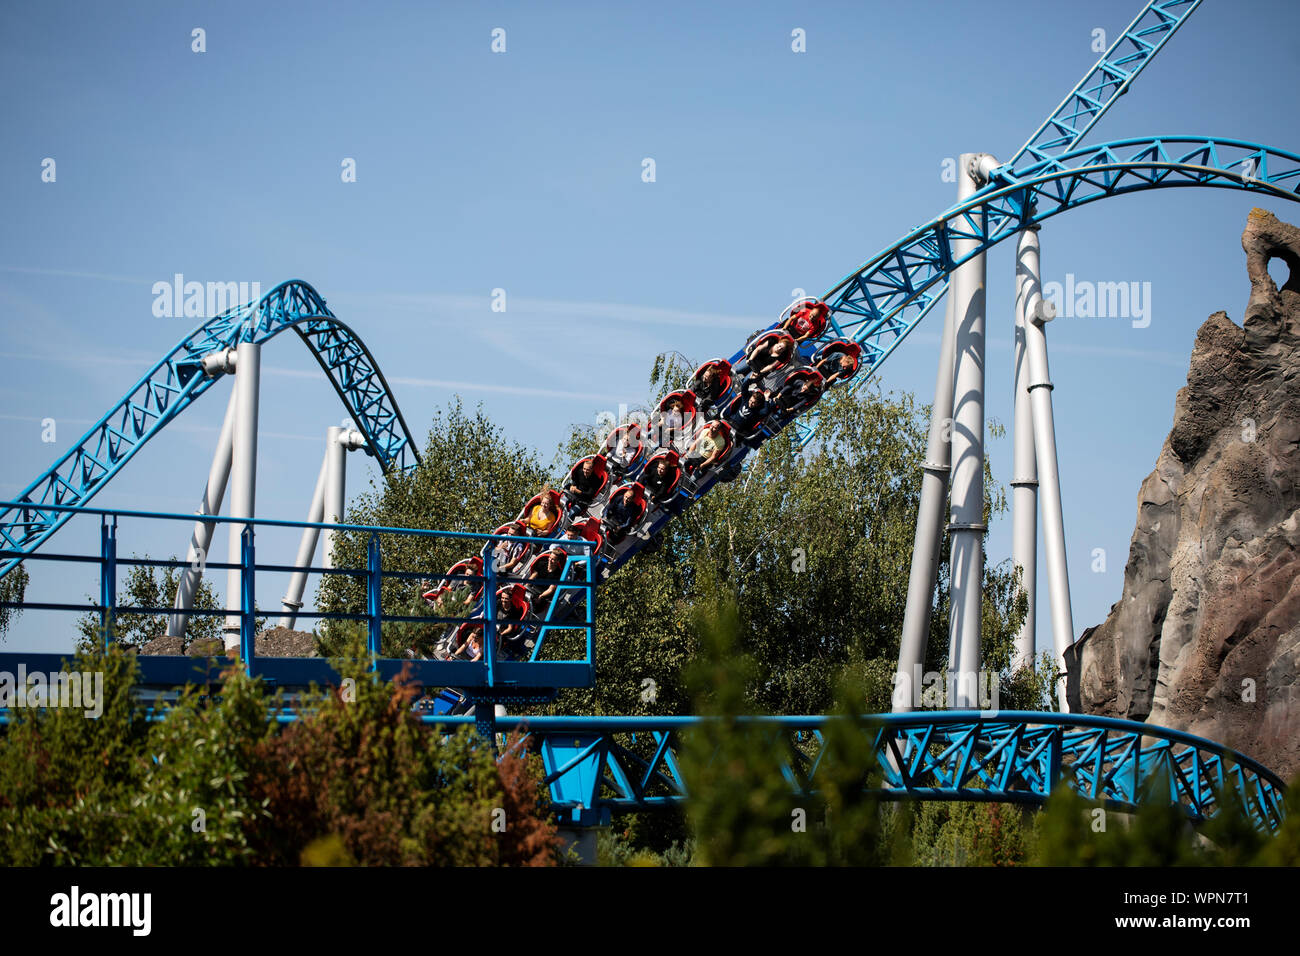 Riders speed through a curve on the Blue Fire mega coaster at Europa-Park in Rust, Germany. Stock Photo